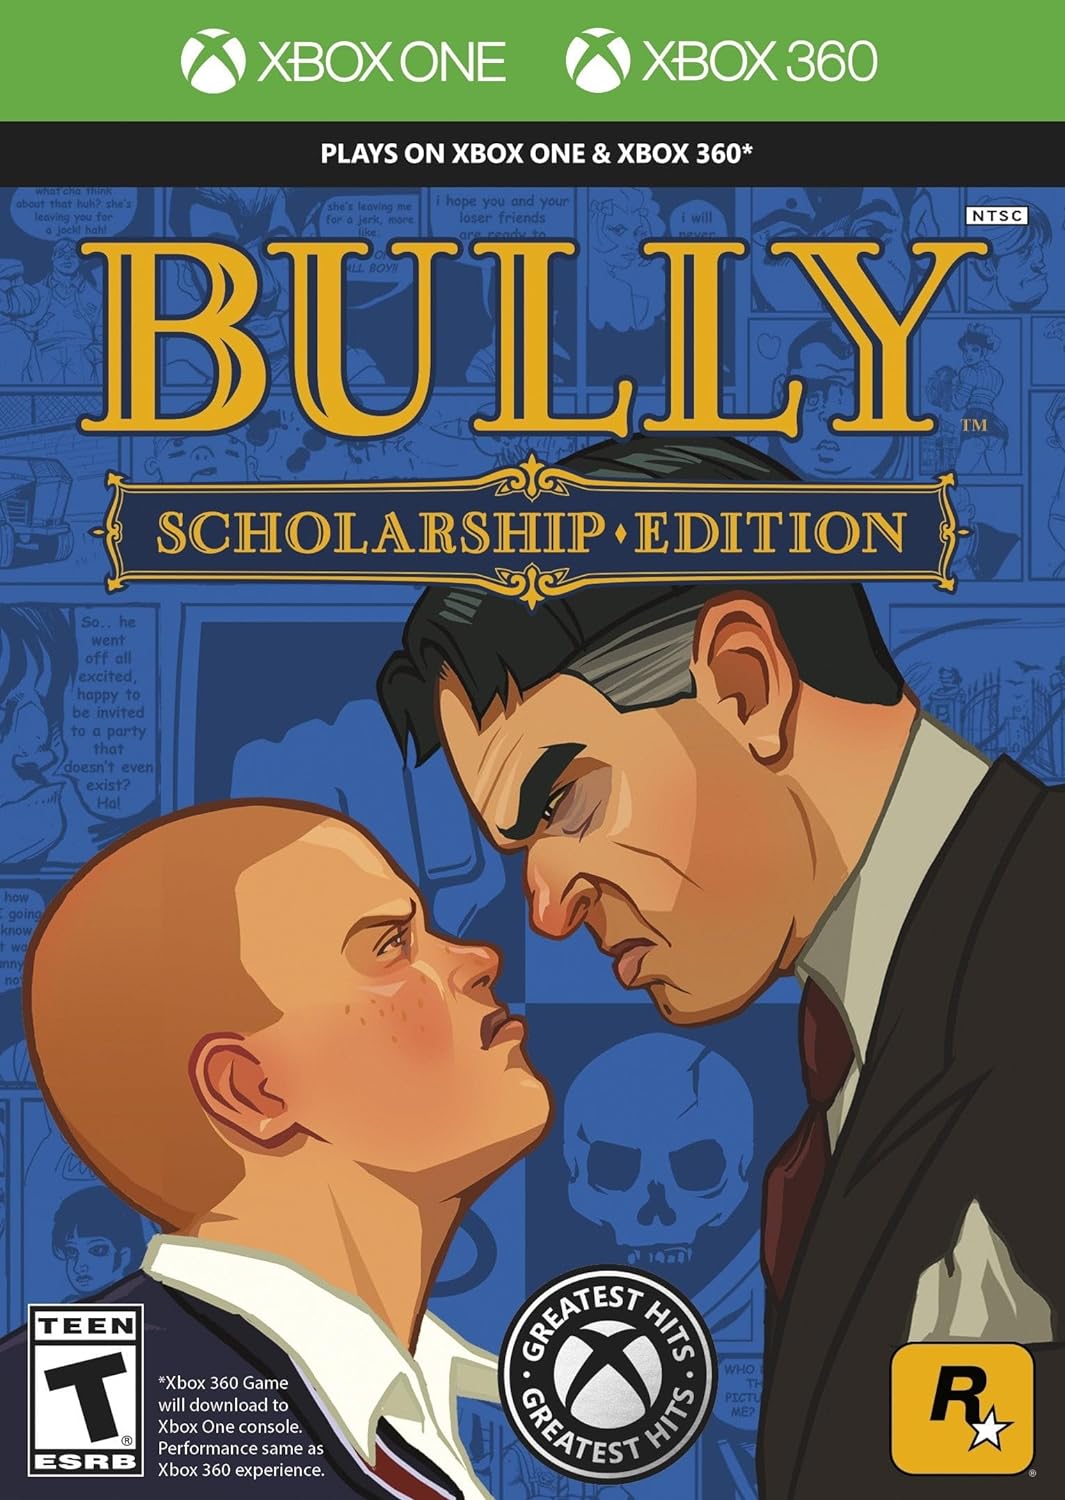 Bully: Scholarship Edition, Rockstar Games, Xbox One/360, 710425498985 - image 3 of 7